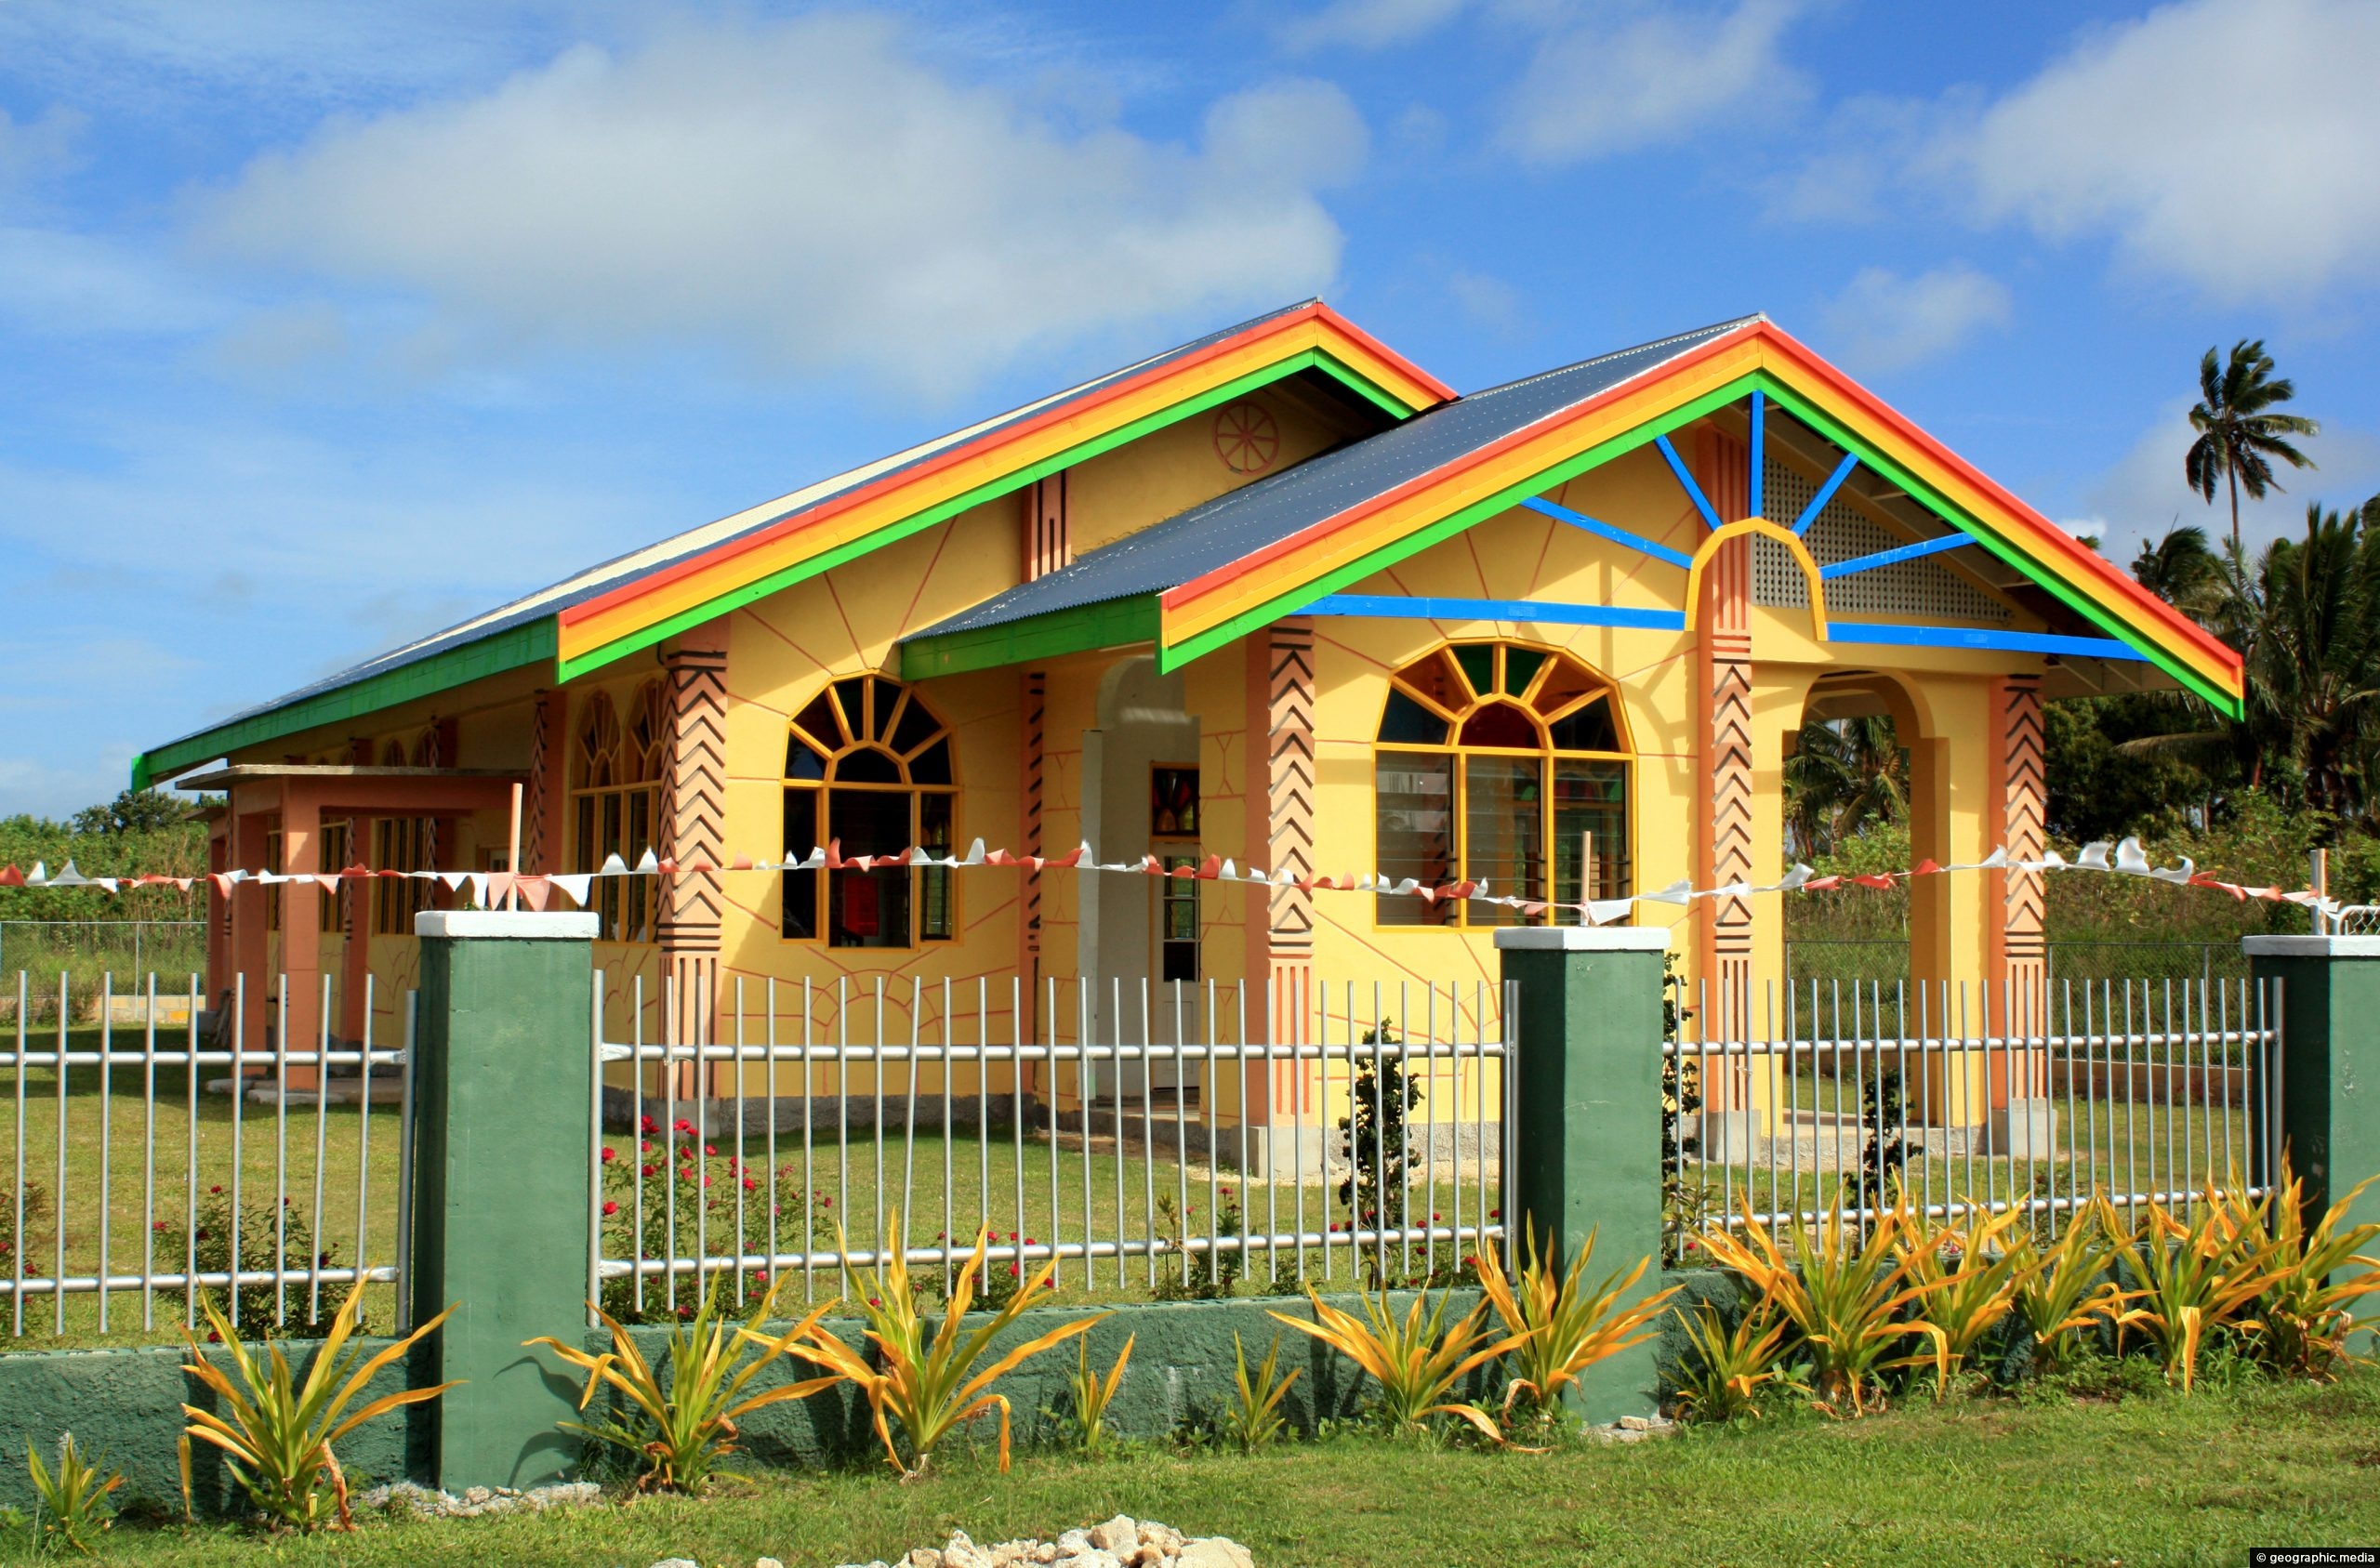 Local Church in a small settlement on Tongatapu